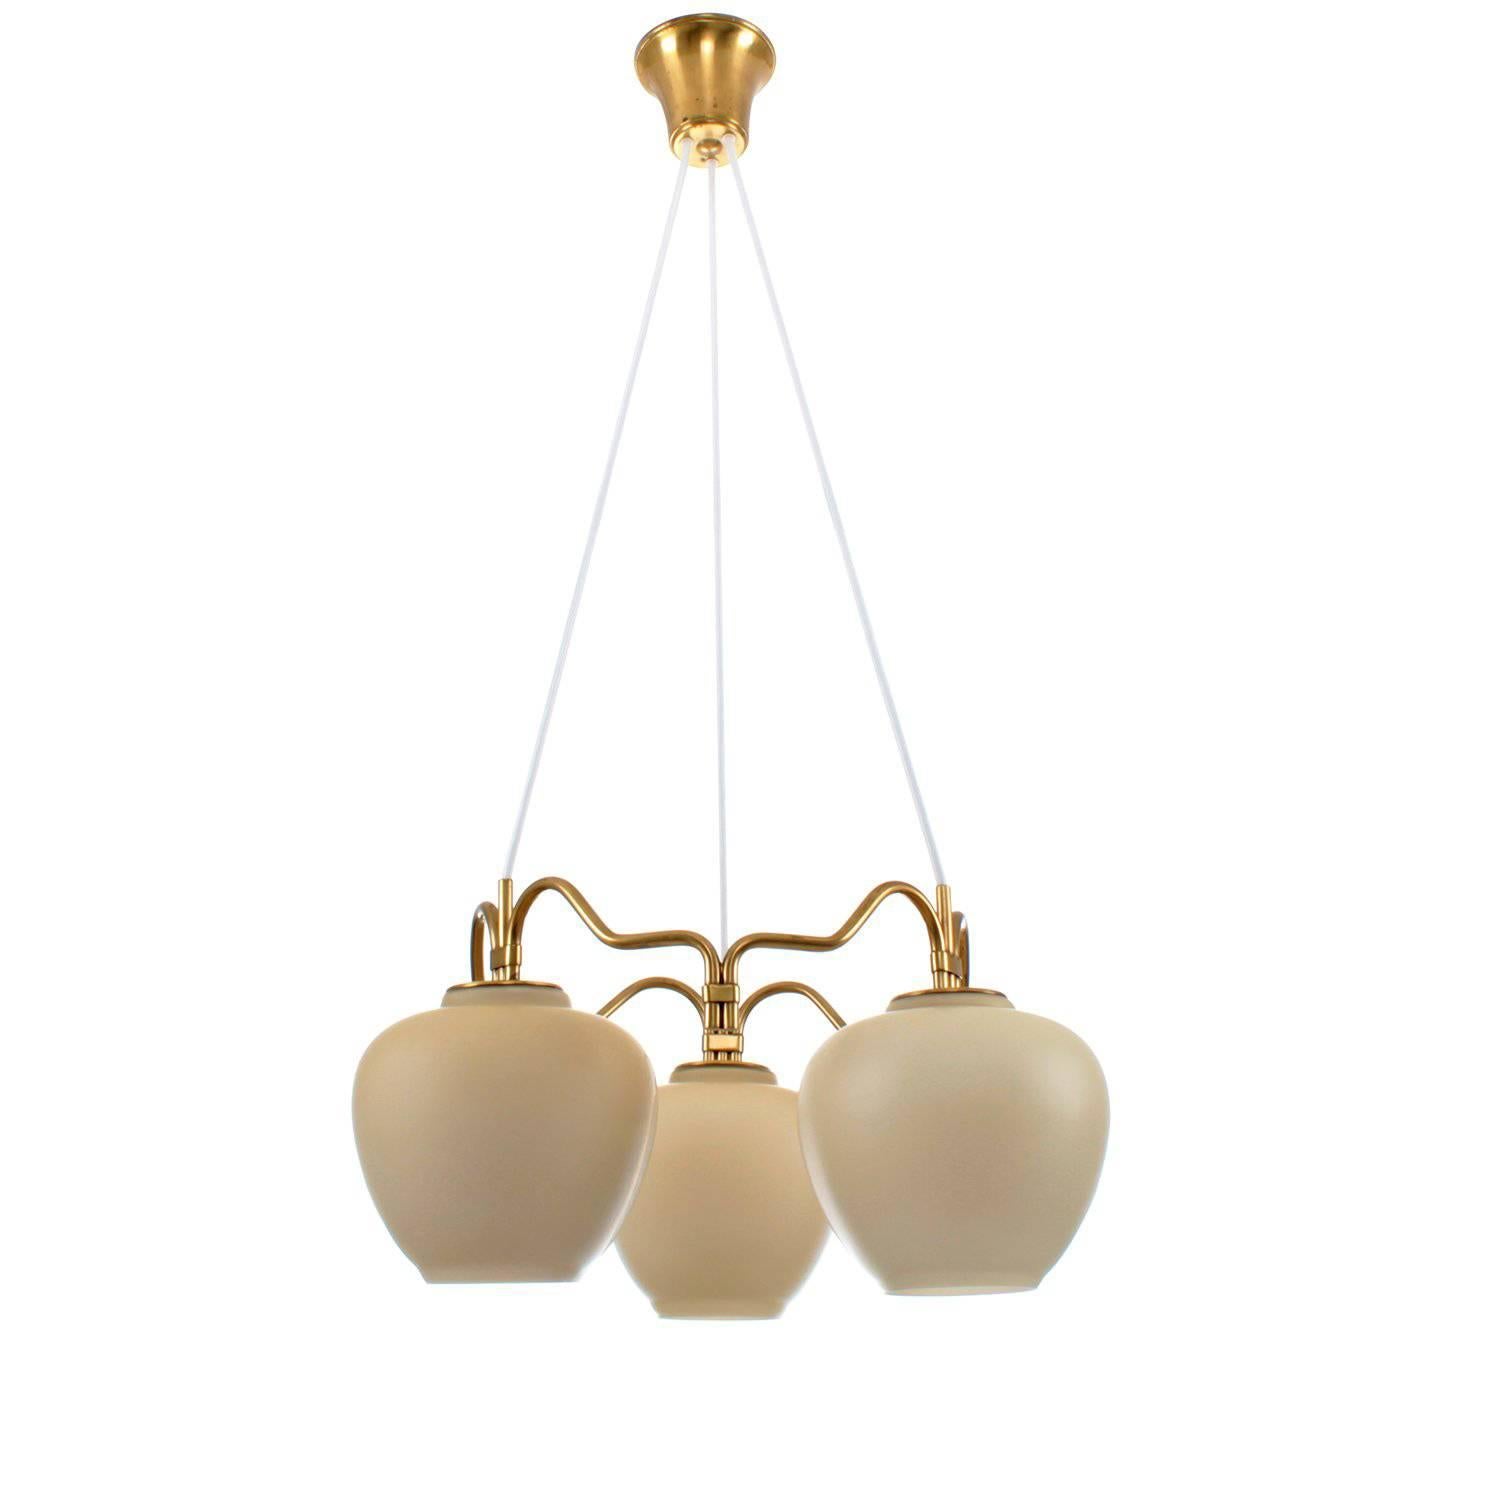 Ring Chandelier, Opal and Brass by Bent Karlby for Lyfa, 1940s For Sale